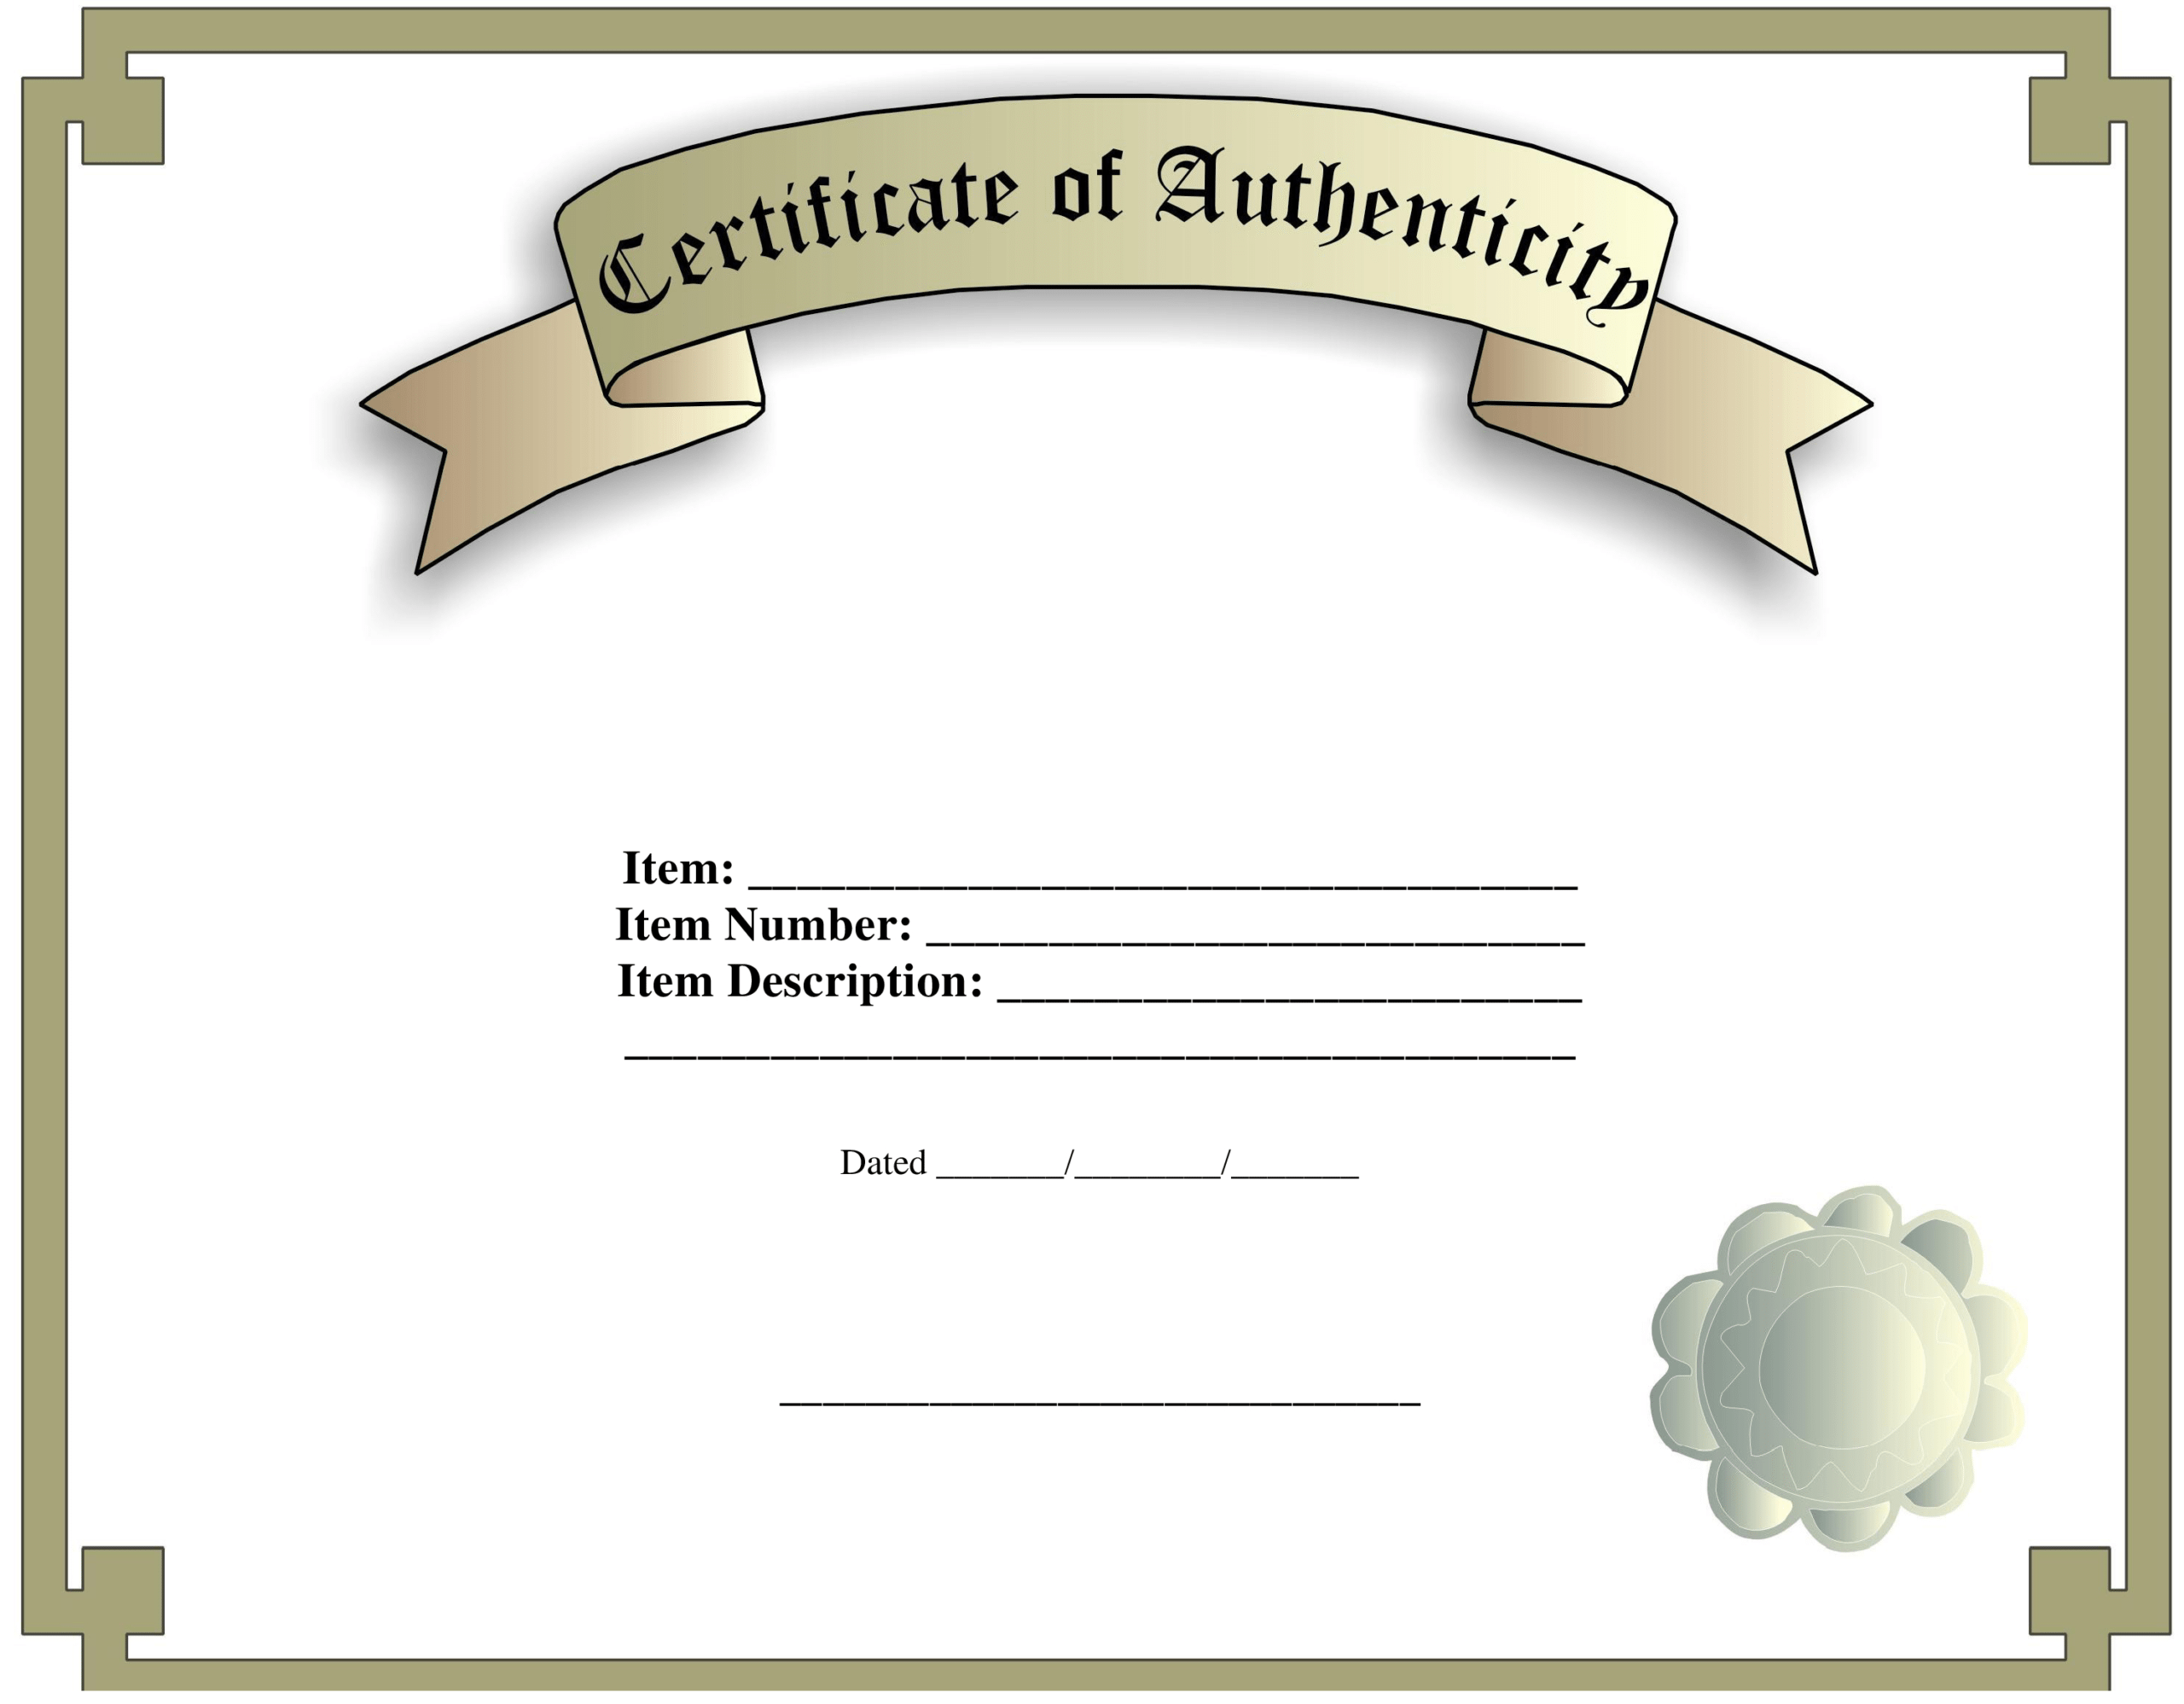 Certificate Of Authenticity Template | Templates At Regarding Certificate Of Authenticity Template